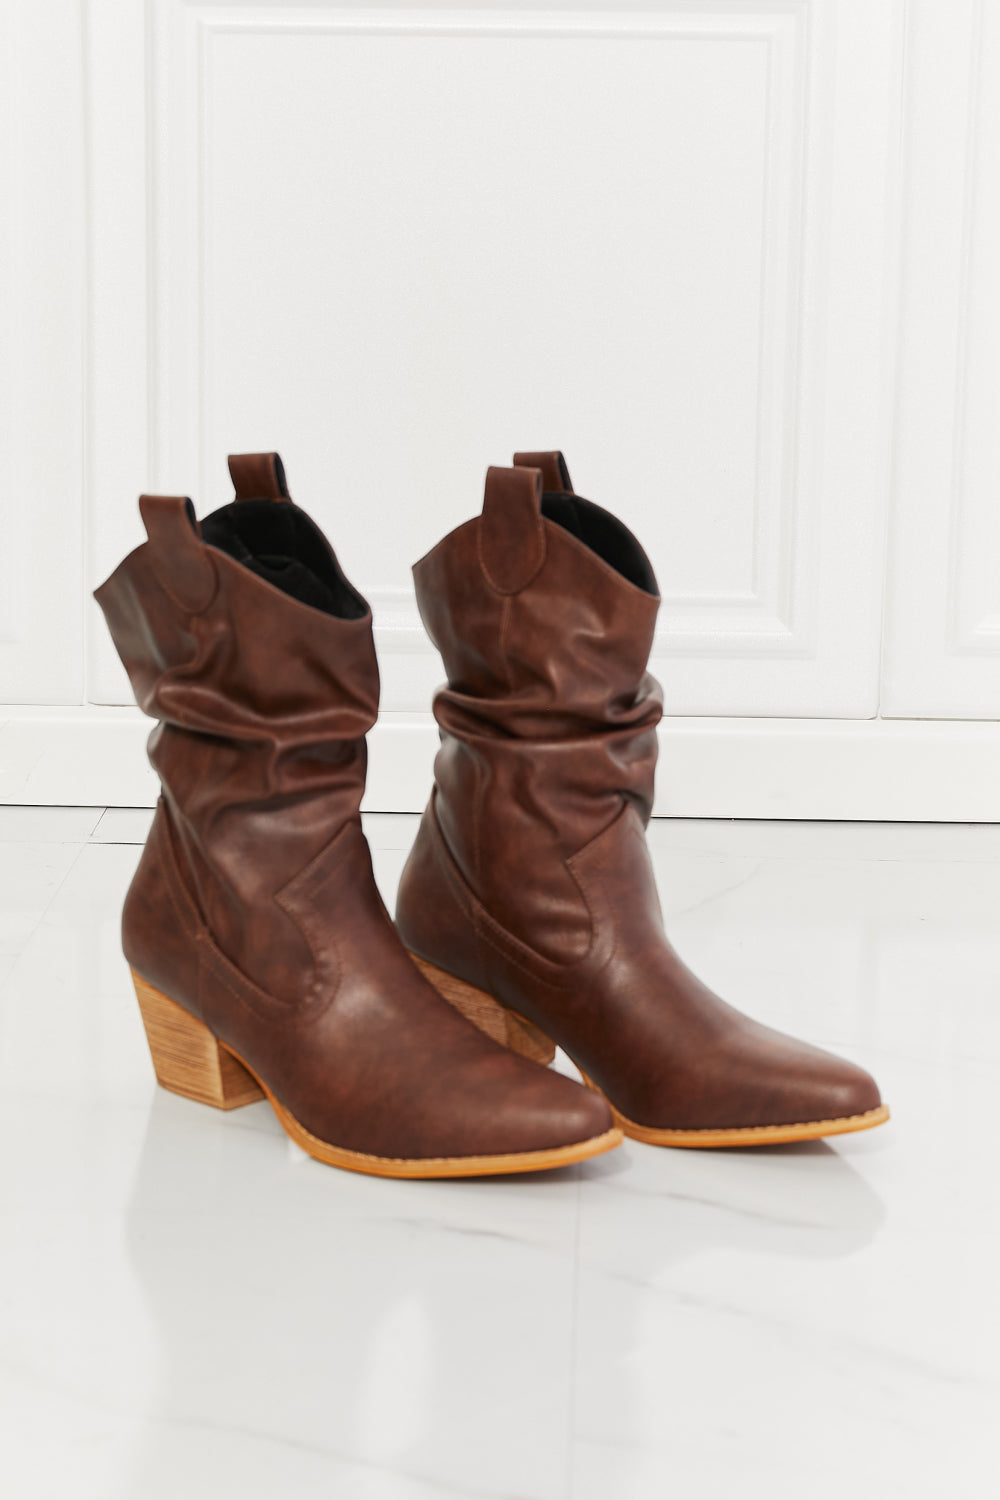 MMShoes Better in Texas Scrunch Cowboy Boots in Brown Print on any thing USA/STOD clothes